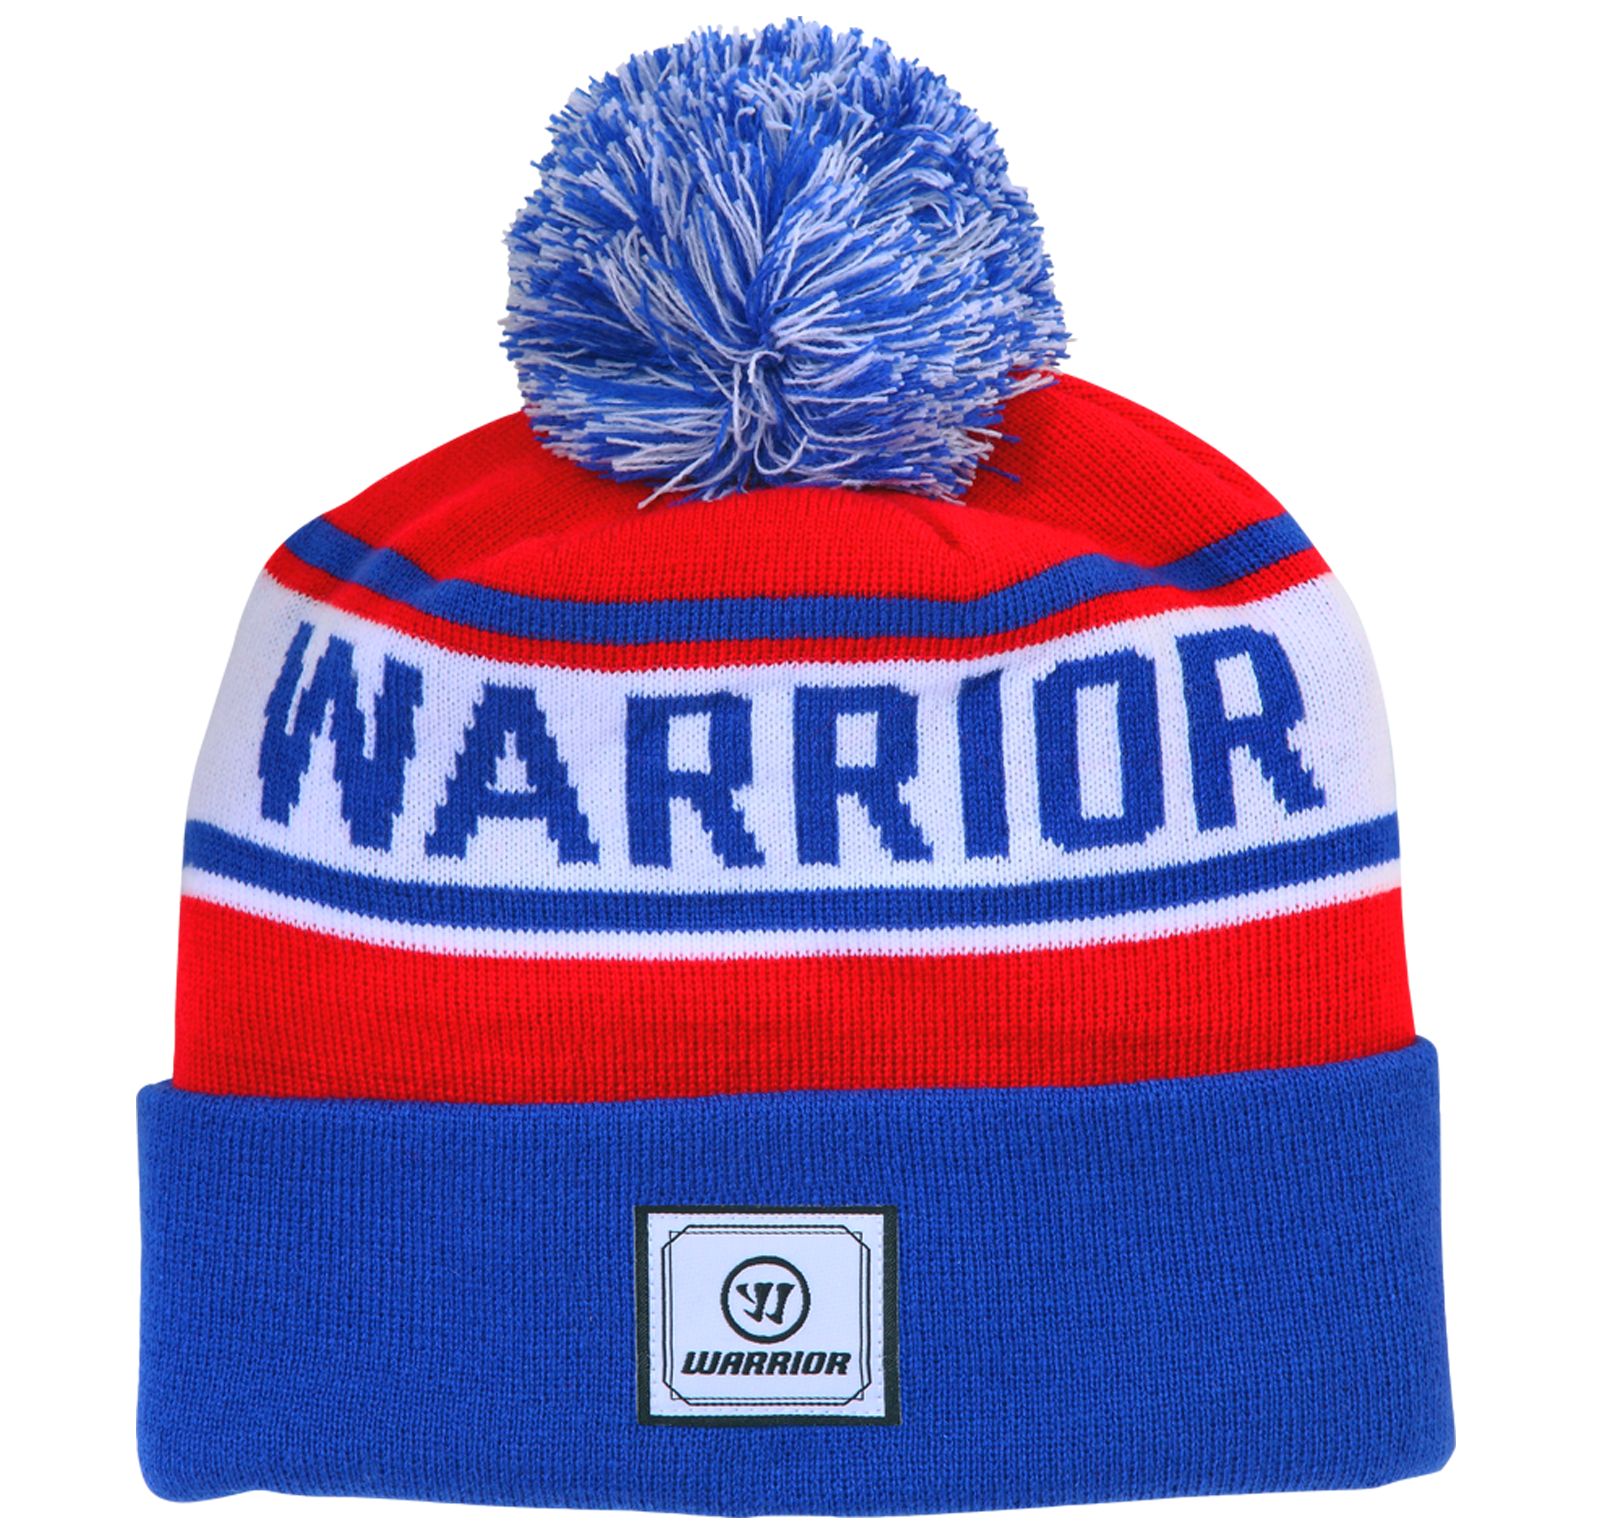 Warrior Classic Toque, Royal Blue with Red & White image number 0